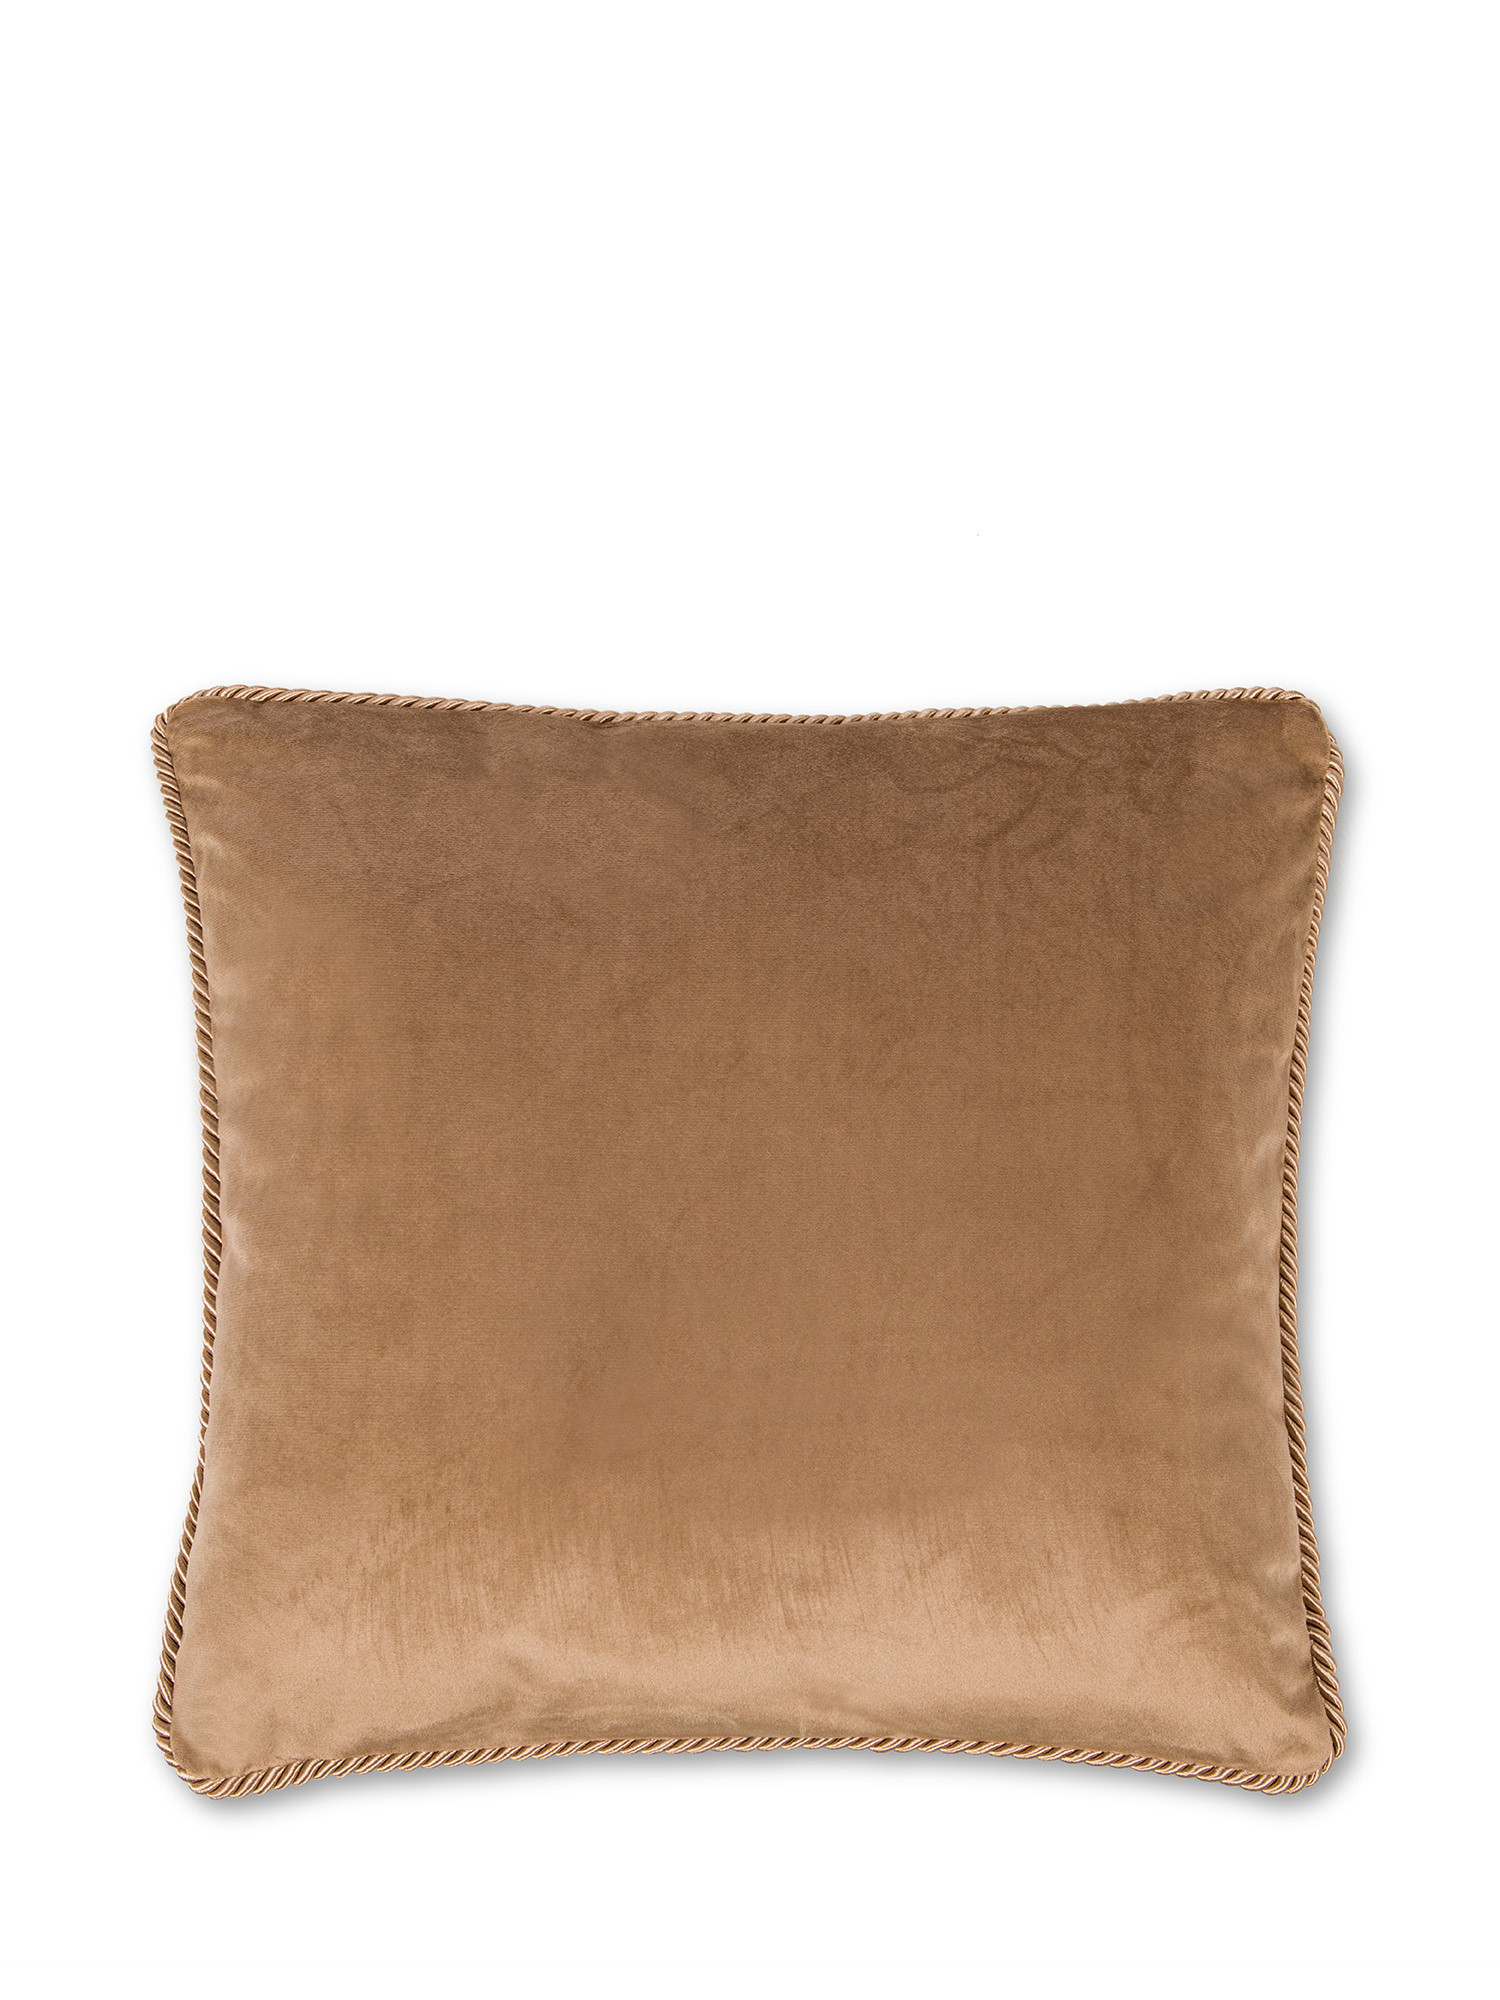 Solid color velvet cushion 45X45cm, TAUPE, large image number 0